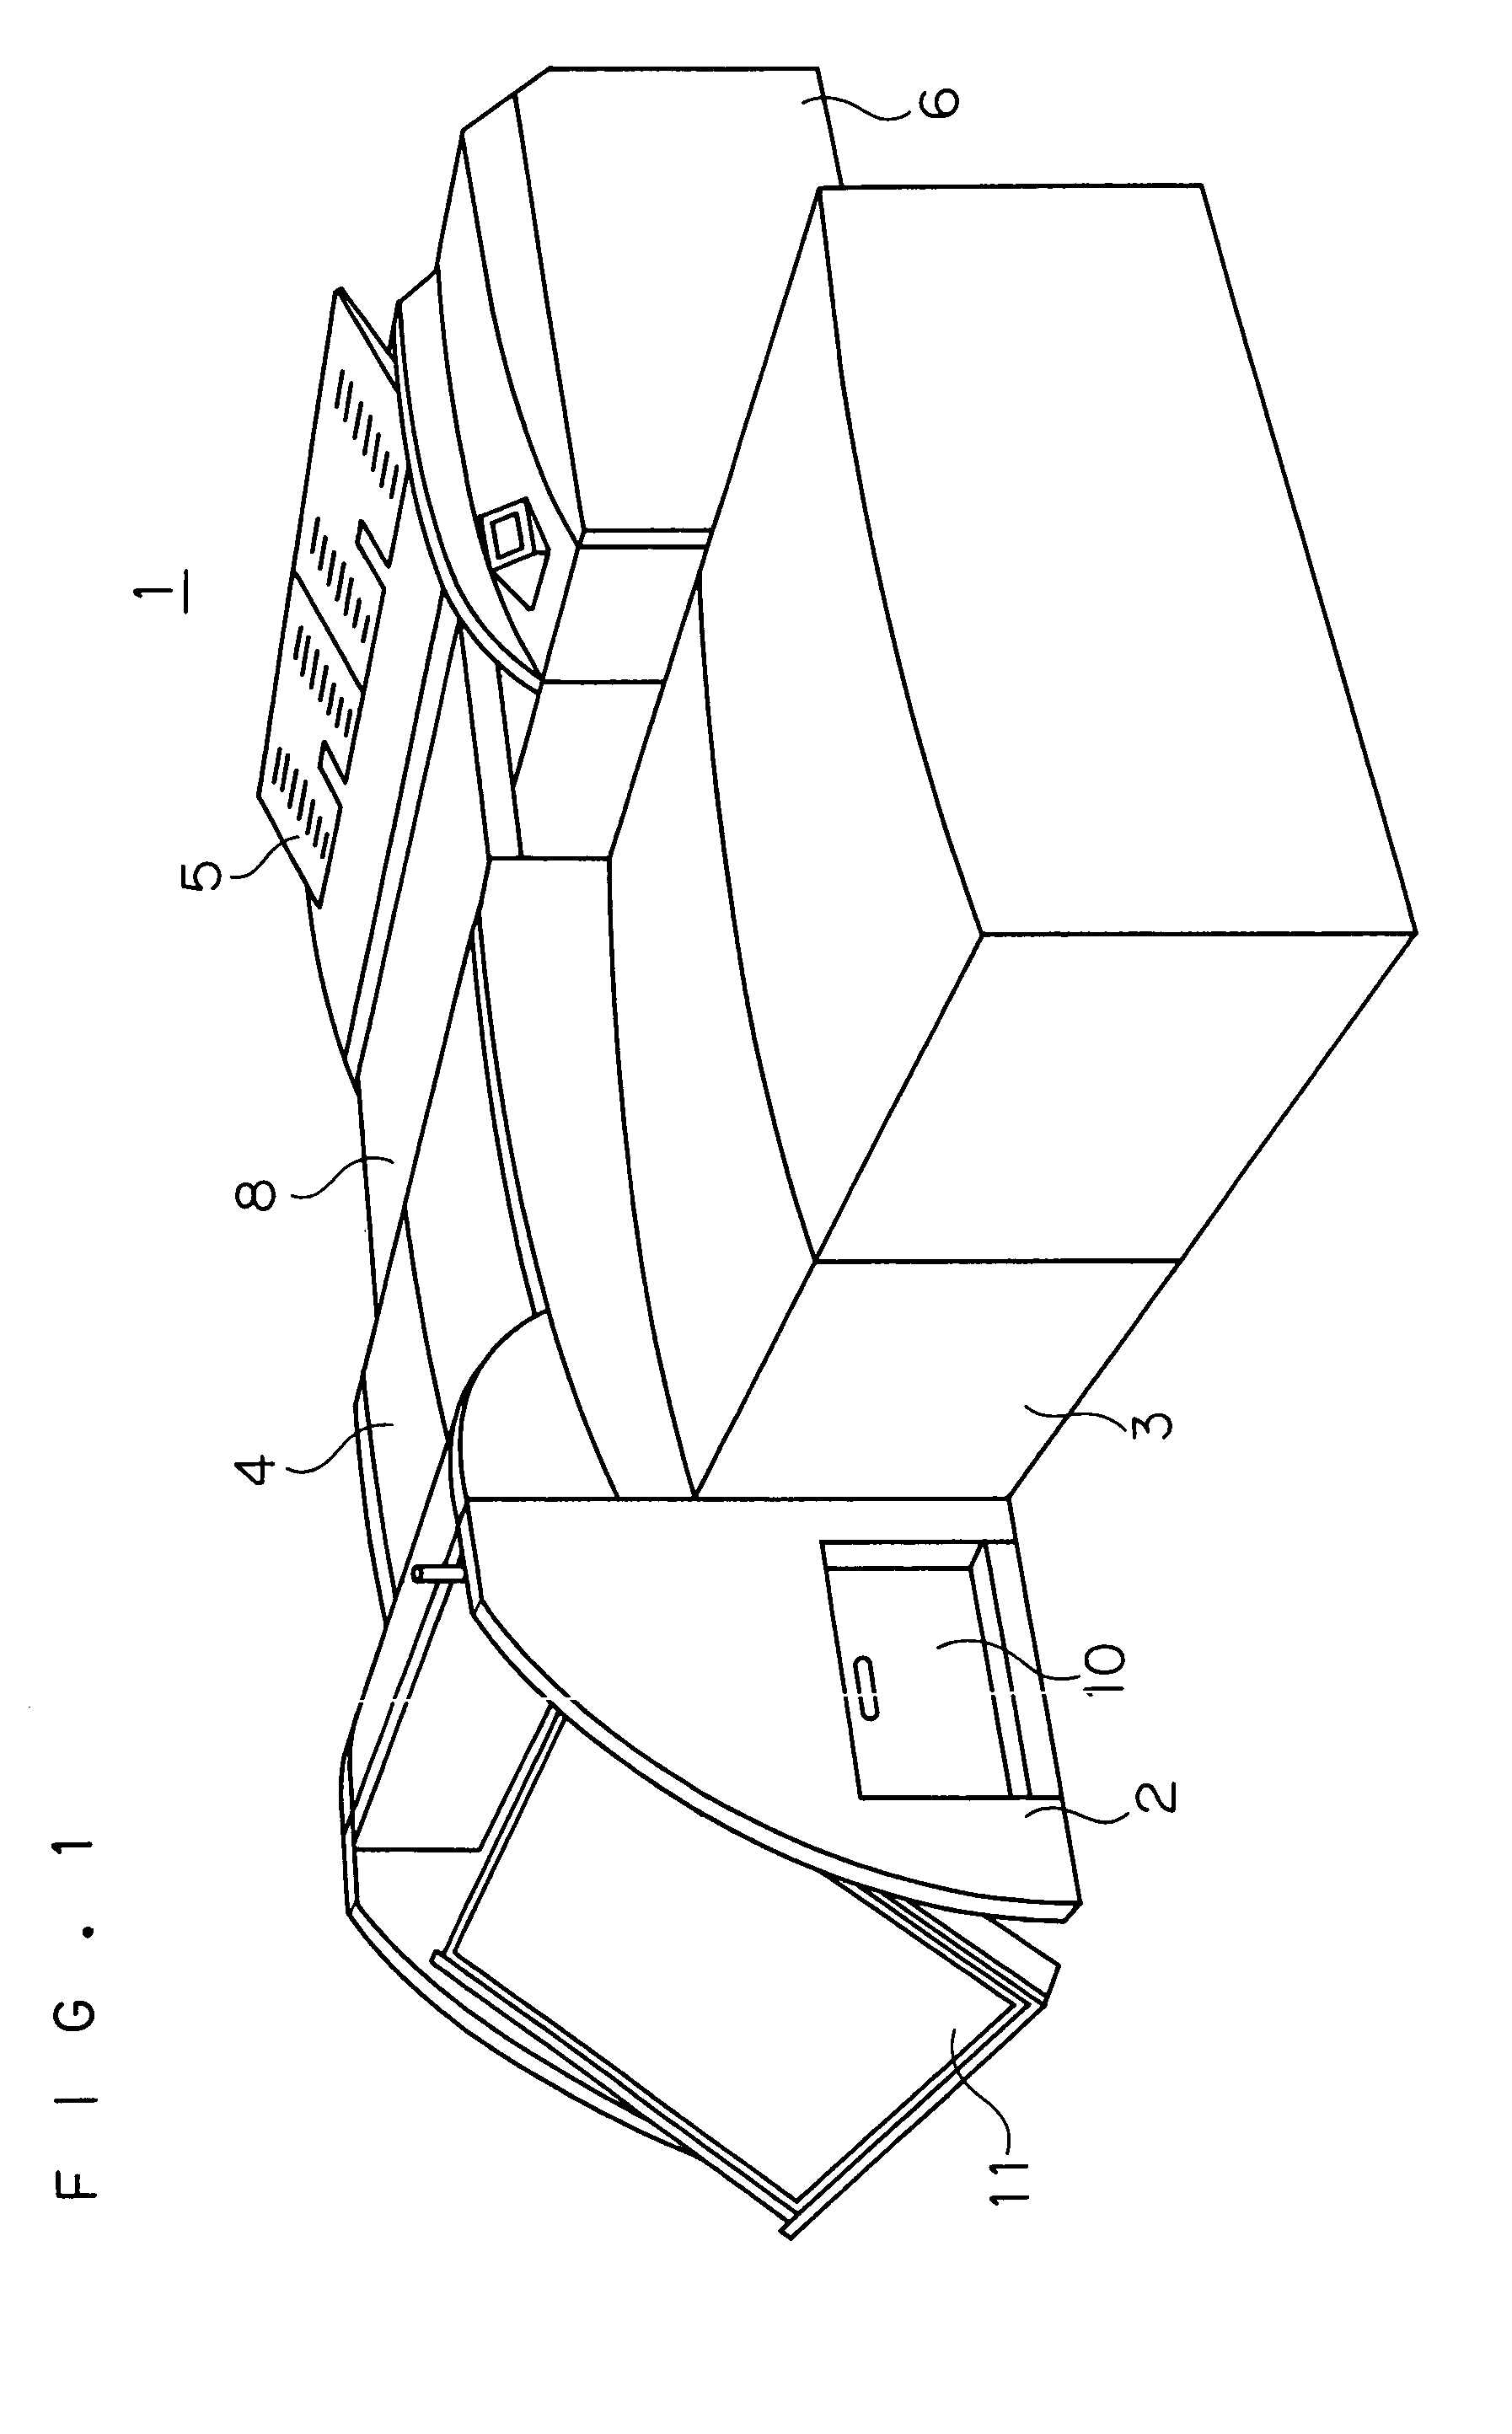 Interleaf removal apparatus, plate feed apparatus and image recording system